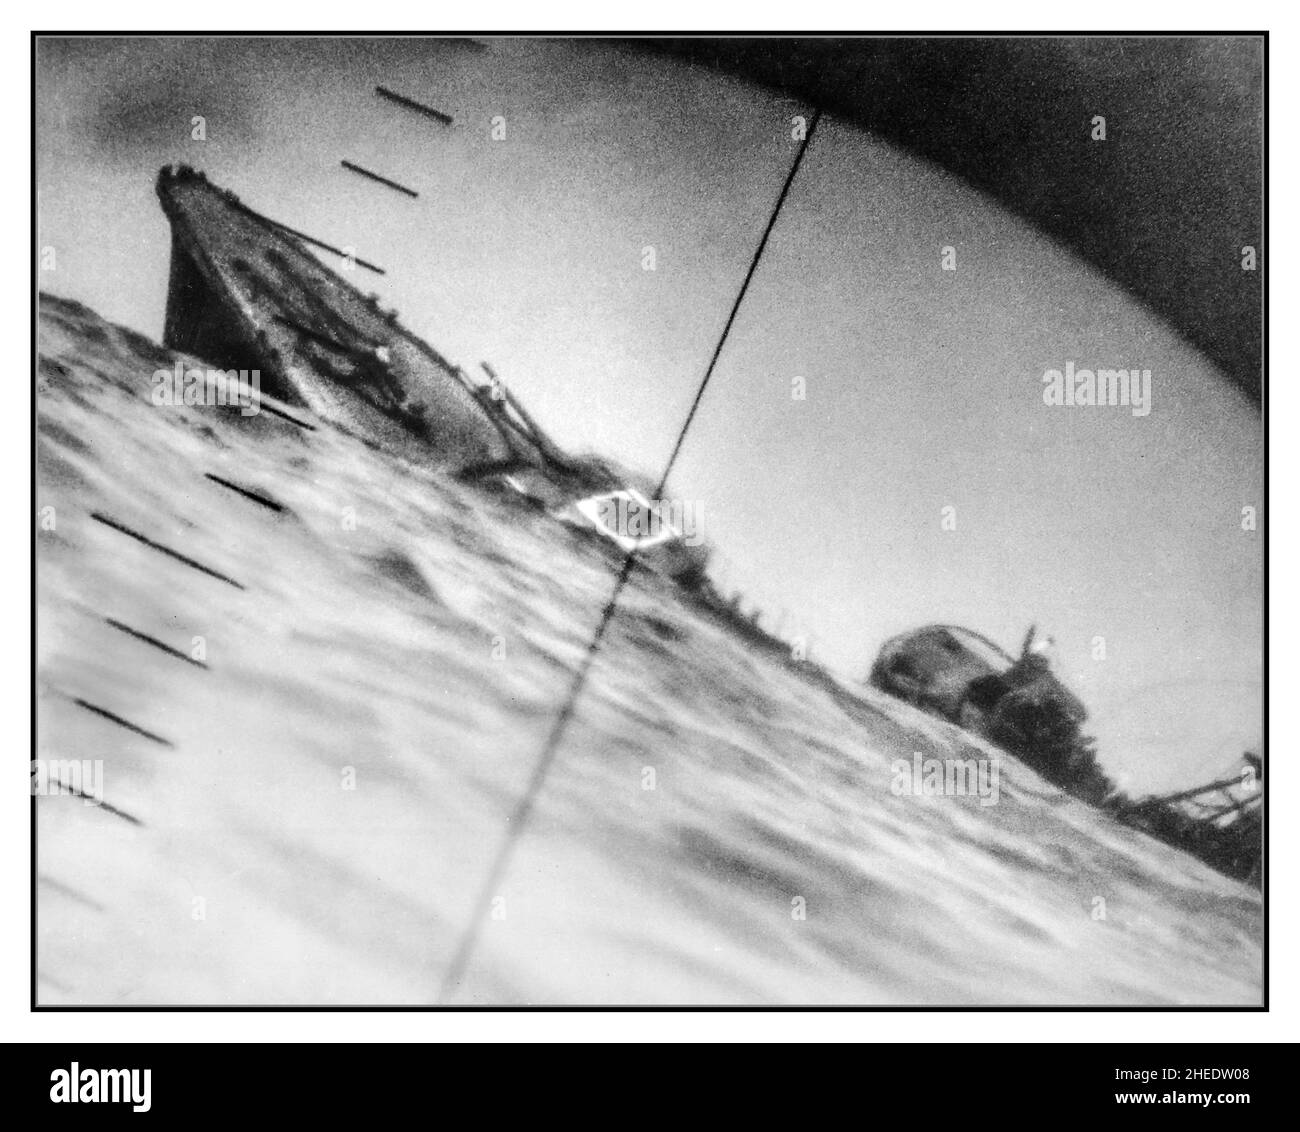 PERISCOPE US SUBMARINE IMAGE of Pacific War 1940s WW2 Sinking of the Japanese destroyer Yamakaze on 25 June 1942 approximately 110 km southeast of Yokosuku, Japan, photographed through the periscope of the U.S. Navy submarine USS Nautilus (SS-168). This position is given in The Official Chronology of the U.S. Navy in World War II by Robert Cressman. NH 111751 says 75 miles southwest of Yokahama Harbor. Yokahama is near Yokosuku. Japan World War II Stock Photo